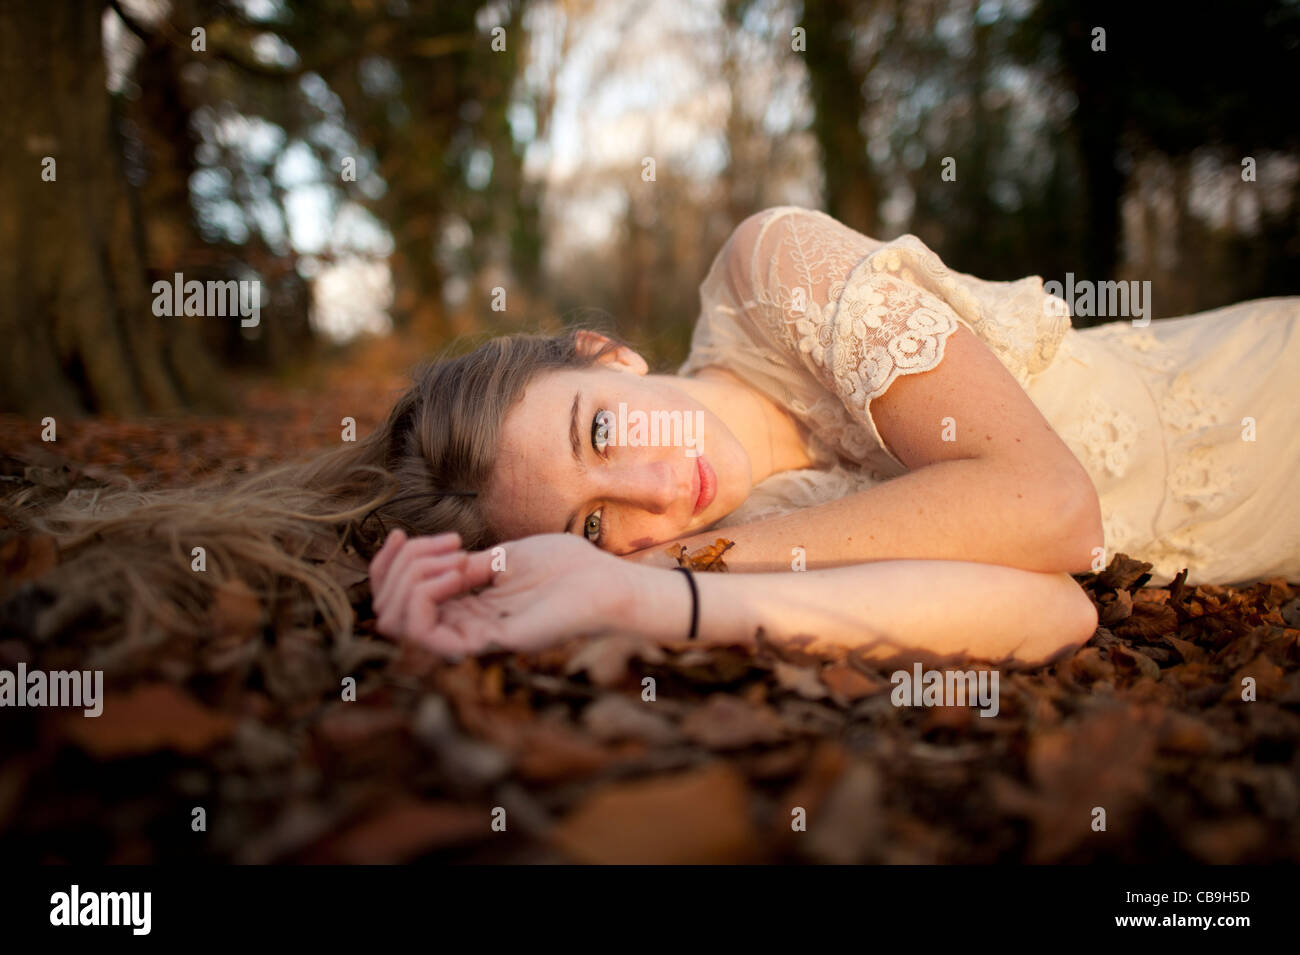 a slim blonde woman girl alone lying down on the ground in woodland autumn afternoon daytime UK Stock Photo